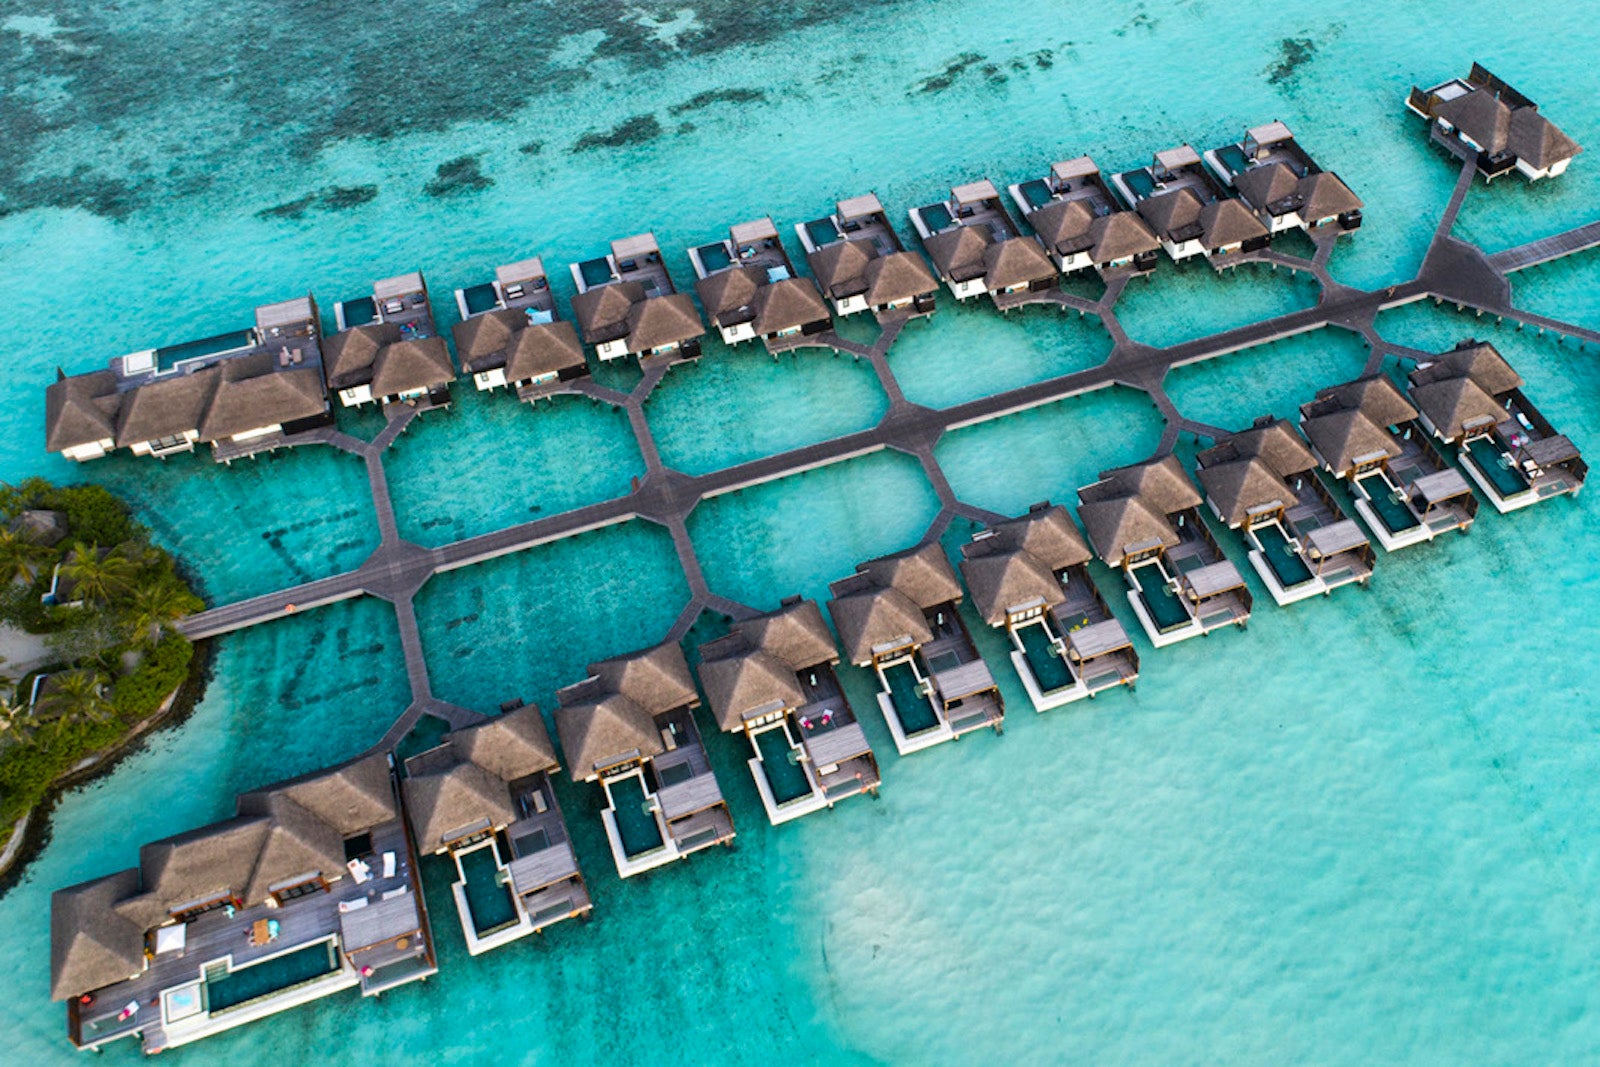 Overwater bungalows sit atop the turquoise blue water connected by walkways